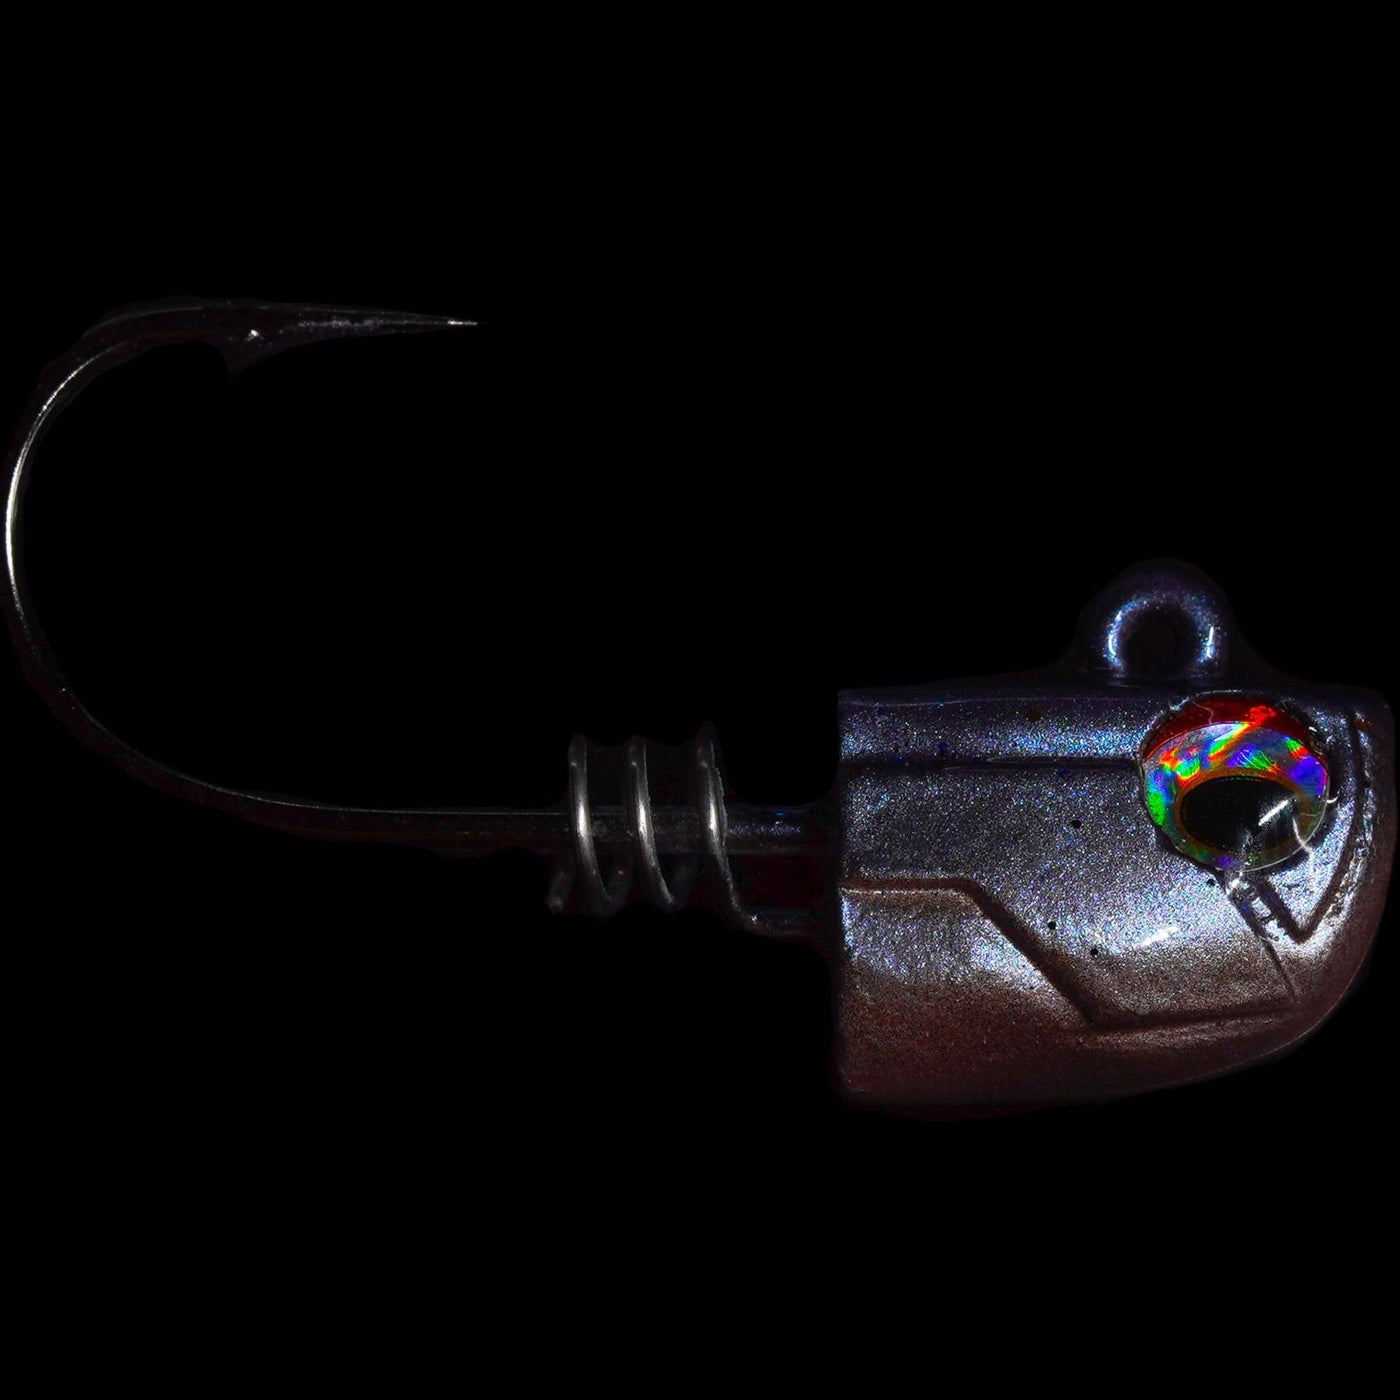 Jig Heads for 3" bait - No Live Bait Needed Jig heads3 6